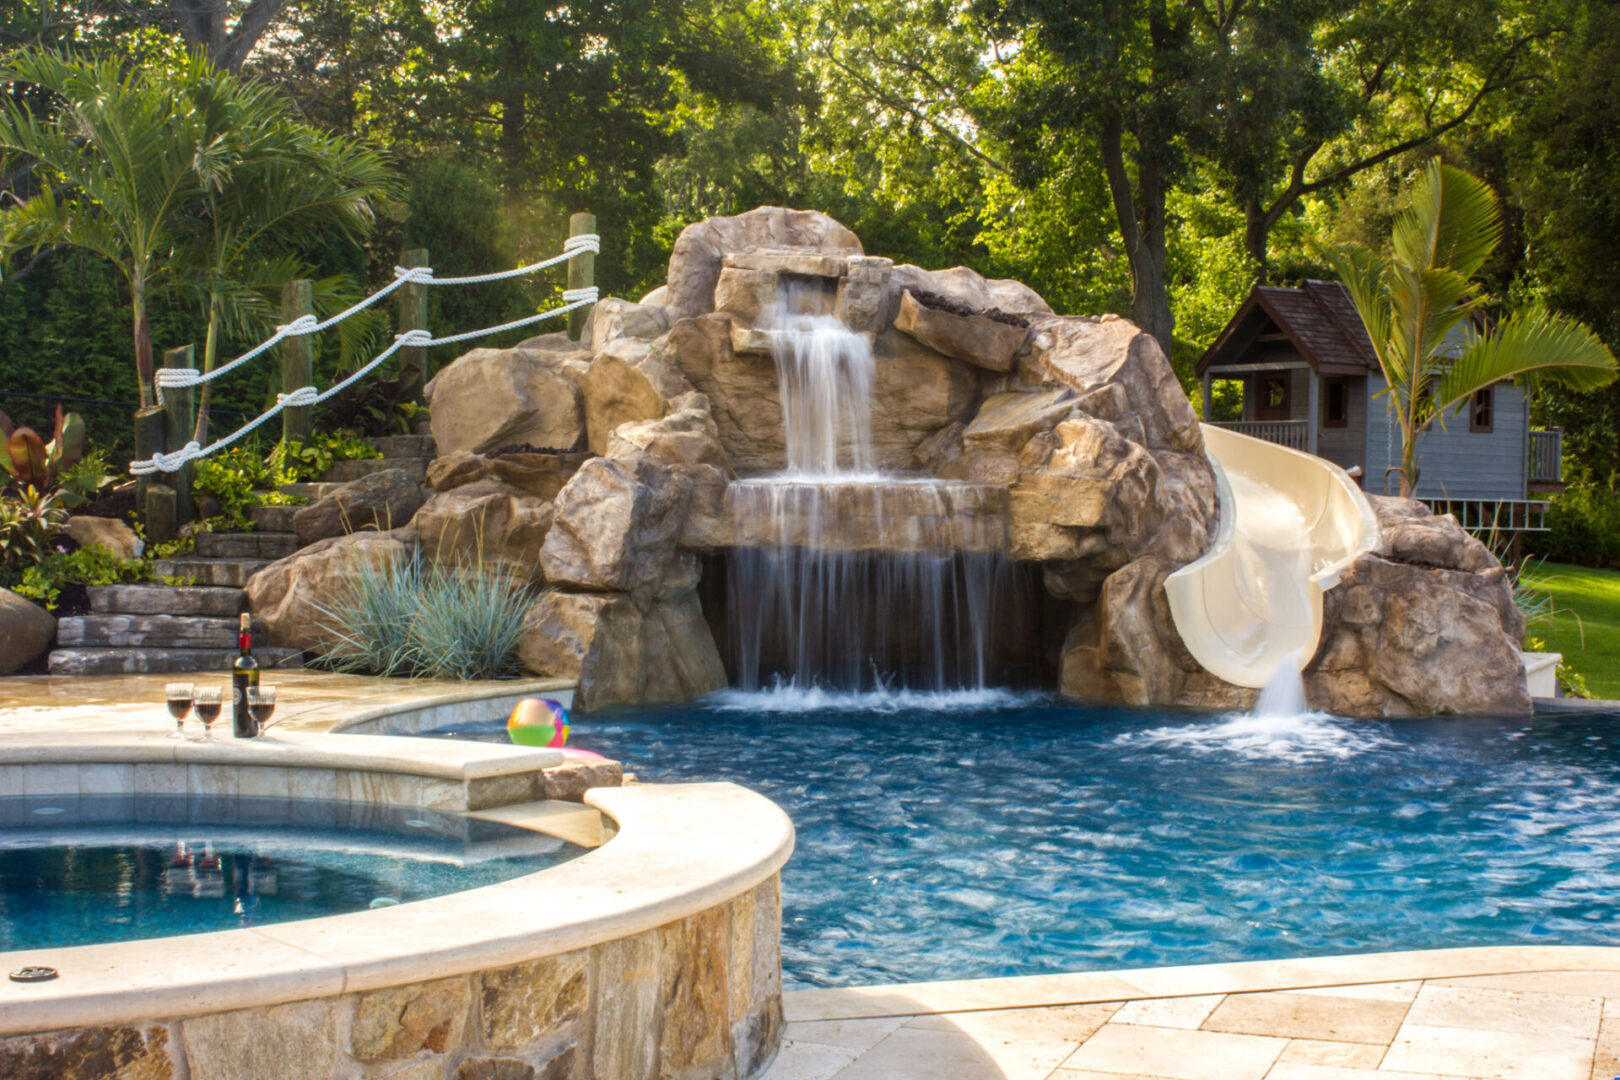 A pool with a slide and waterfall in the back ground